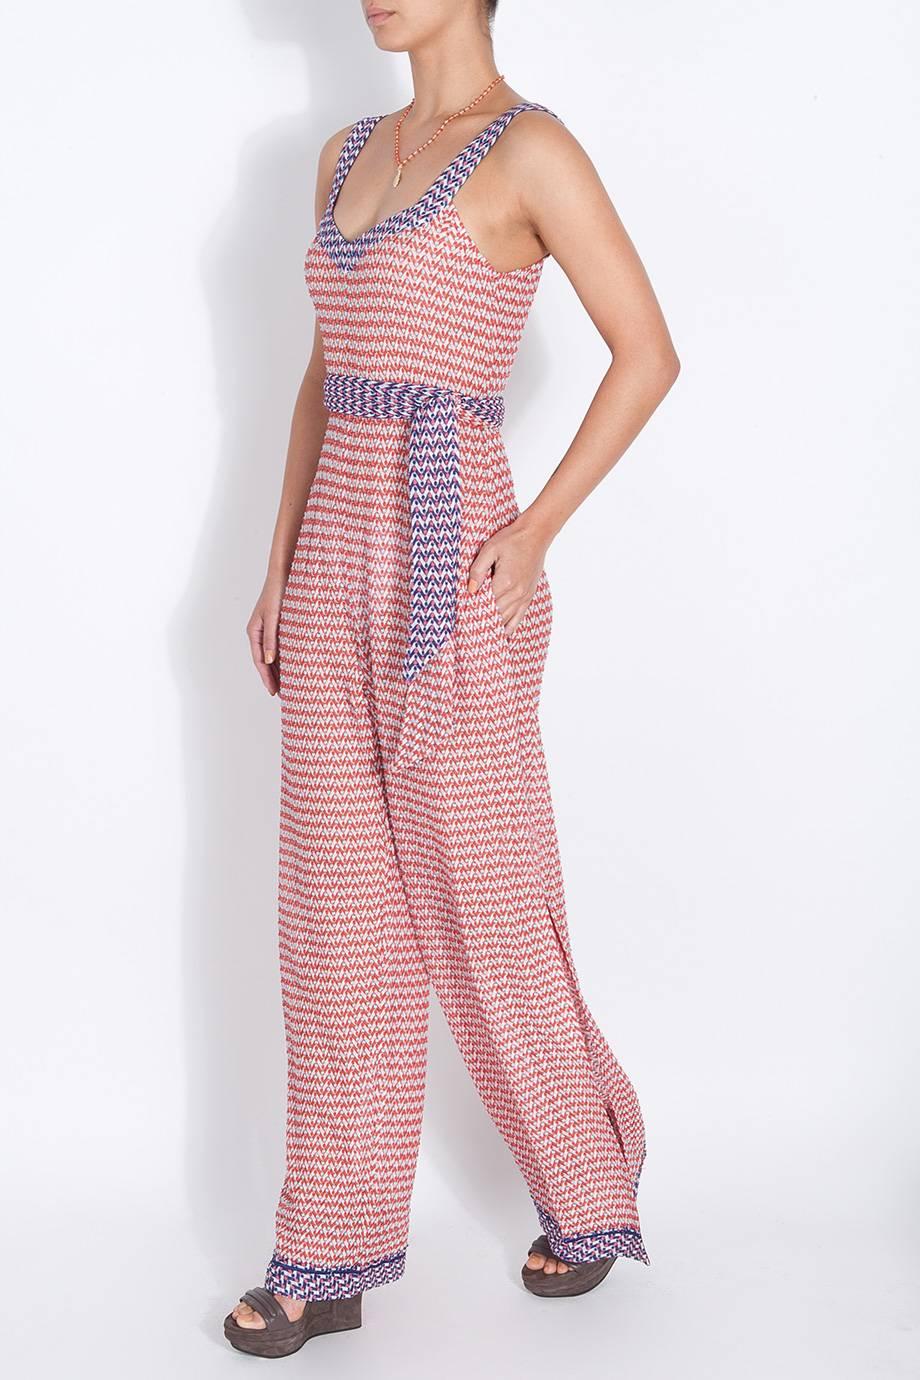 Missoni siganture jumpsuit
Classic MISSONI signature zigzag crochet knit
Simply slips on
Wide palazzo legs
Comes with matching belt
Dry Clean only
Made in Italy
Size 40